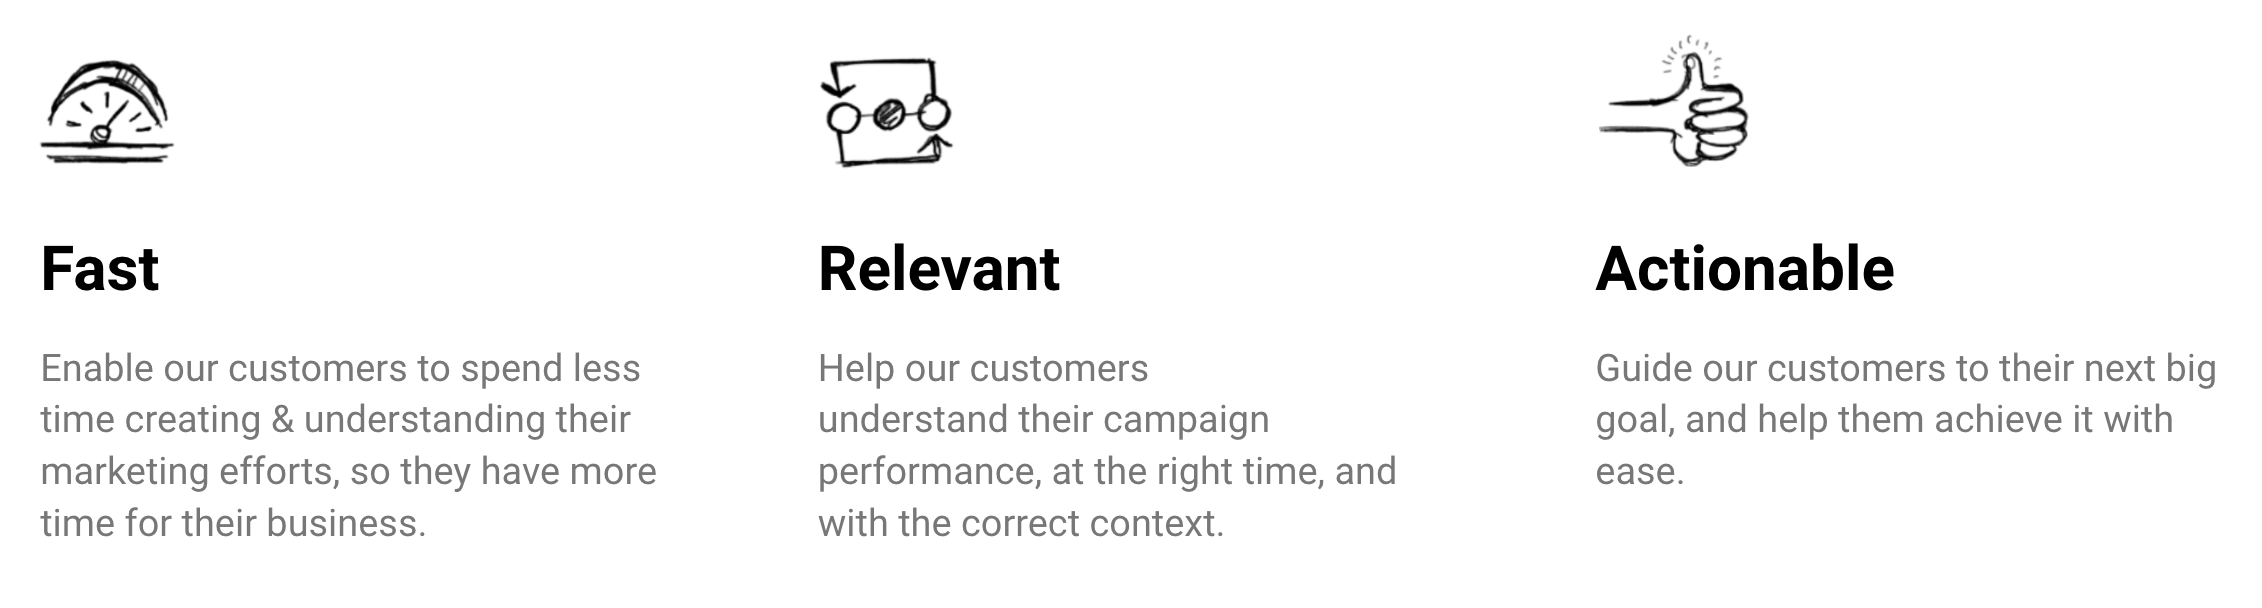 Fast. Relevant. Actionable